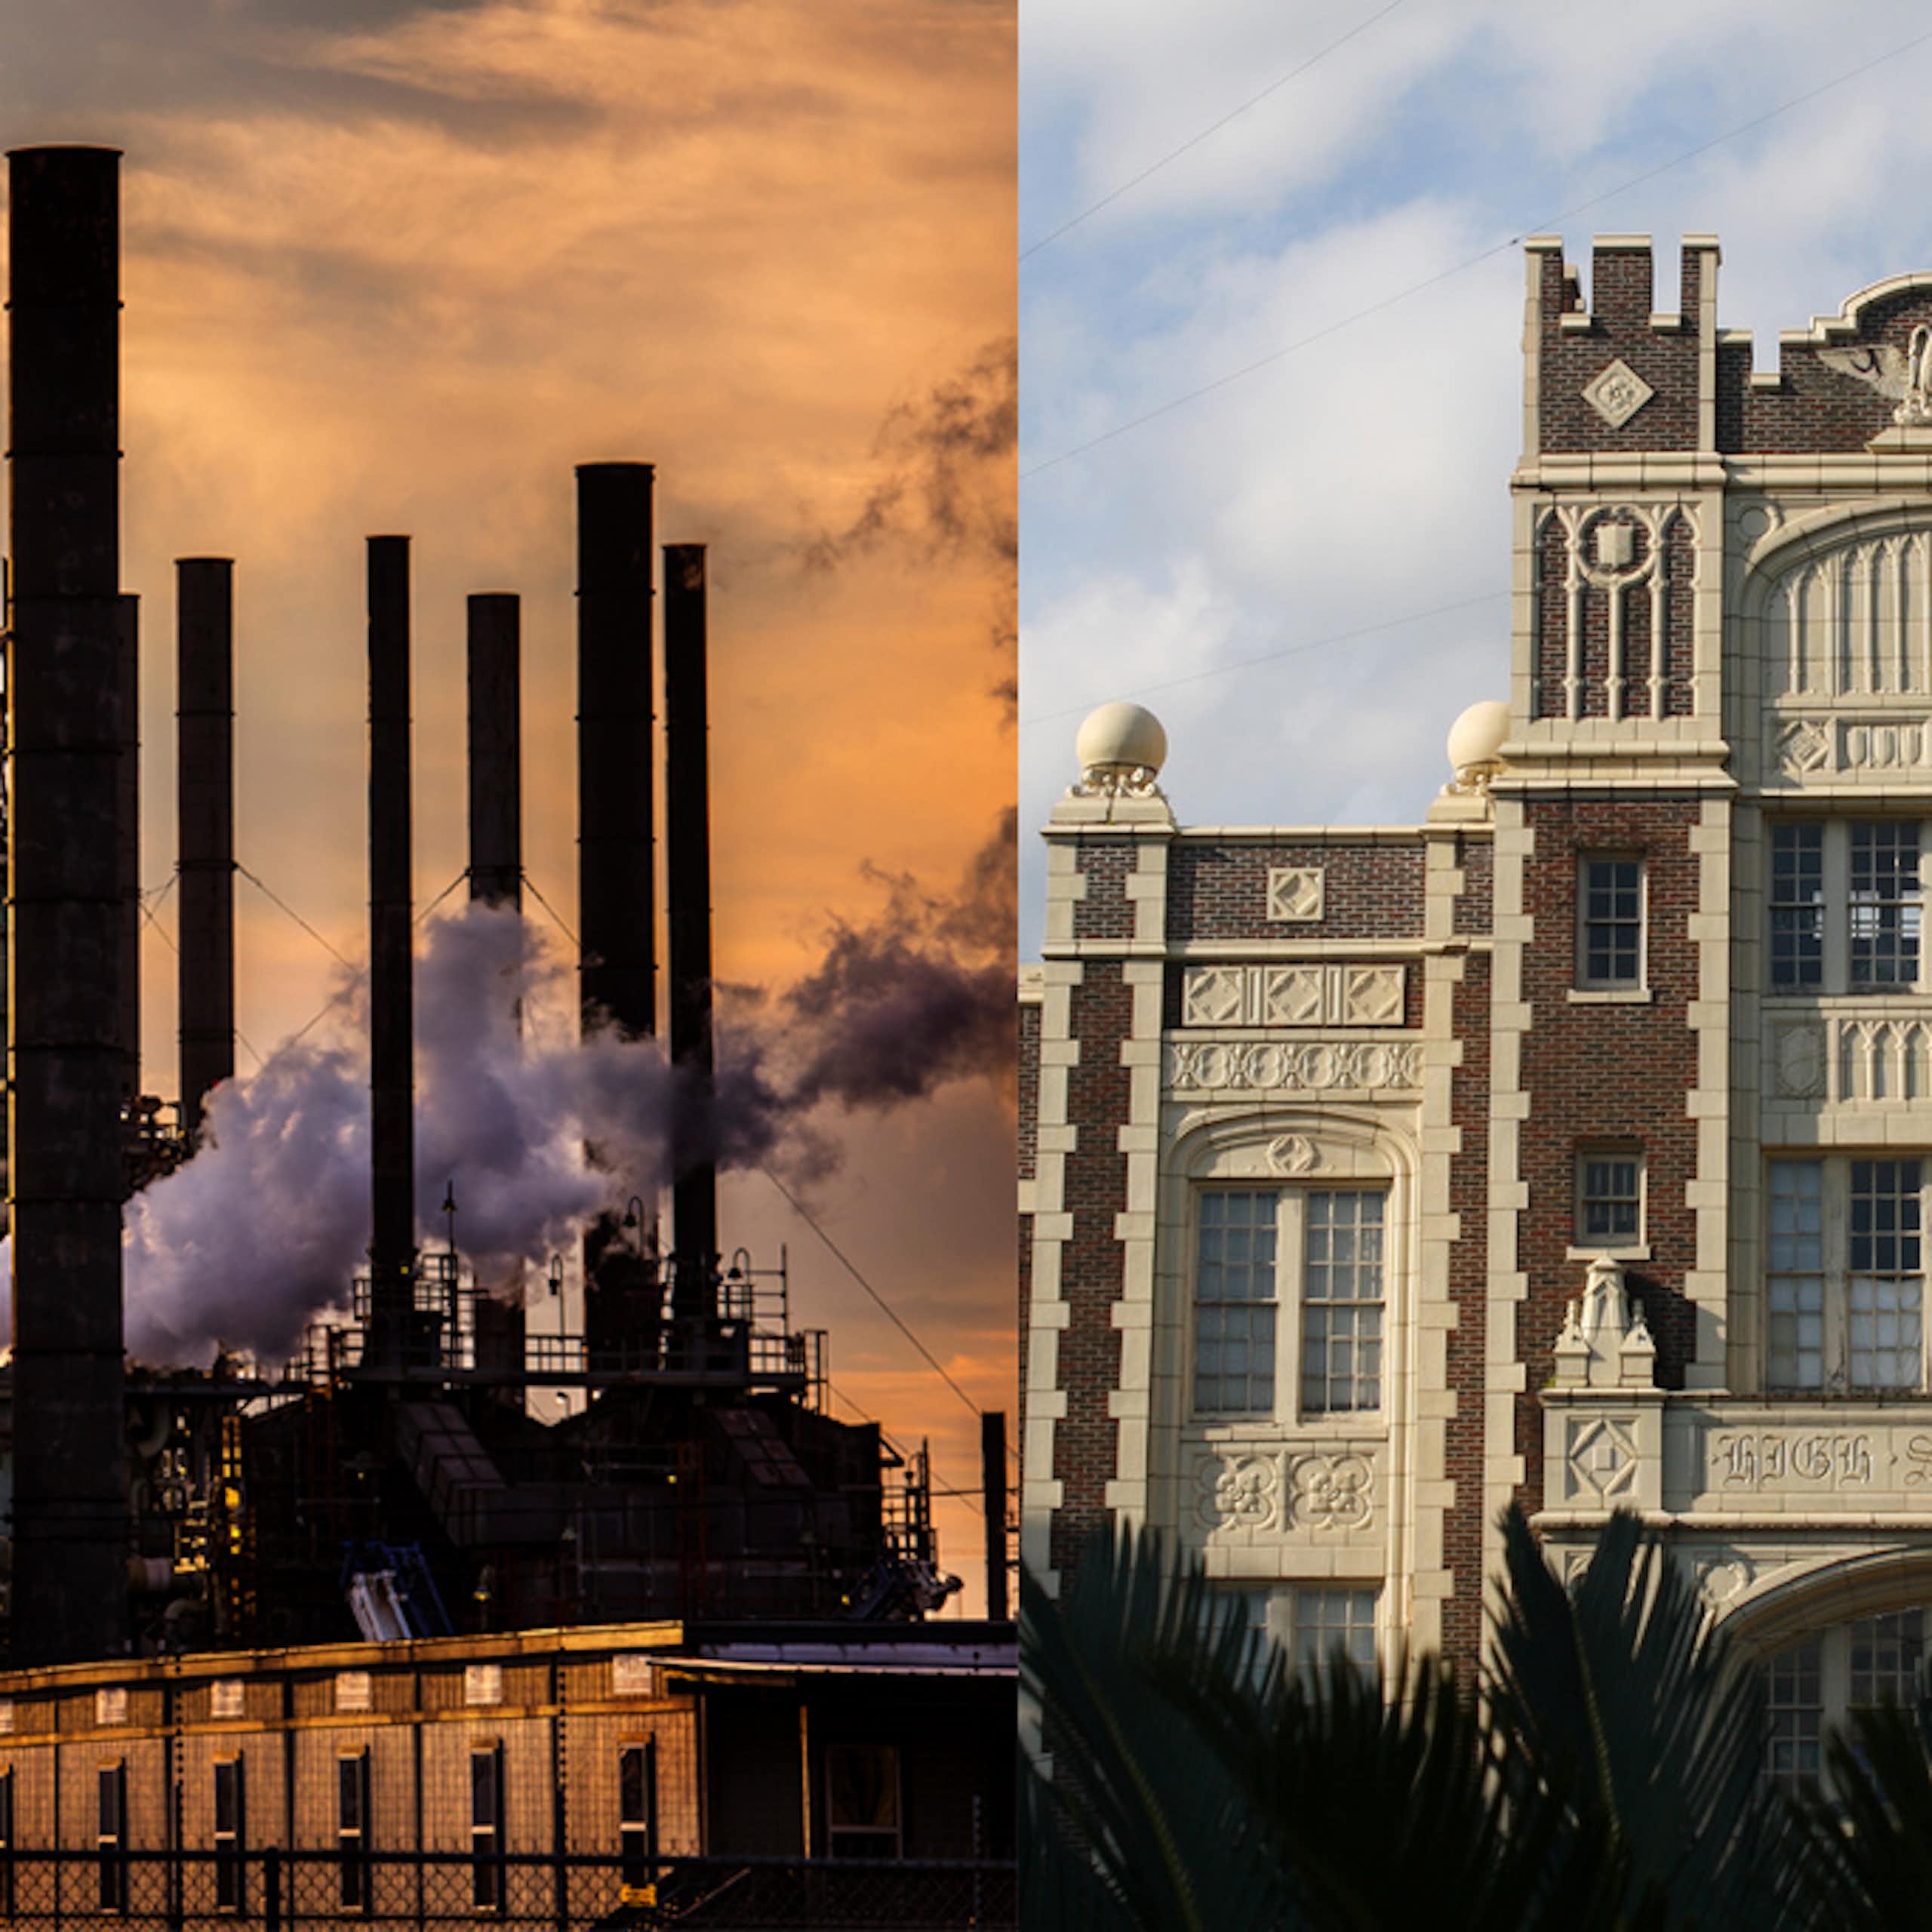 On the left, refinery with smokestacks and steam, on the right, brick school building